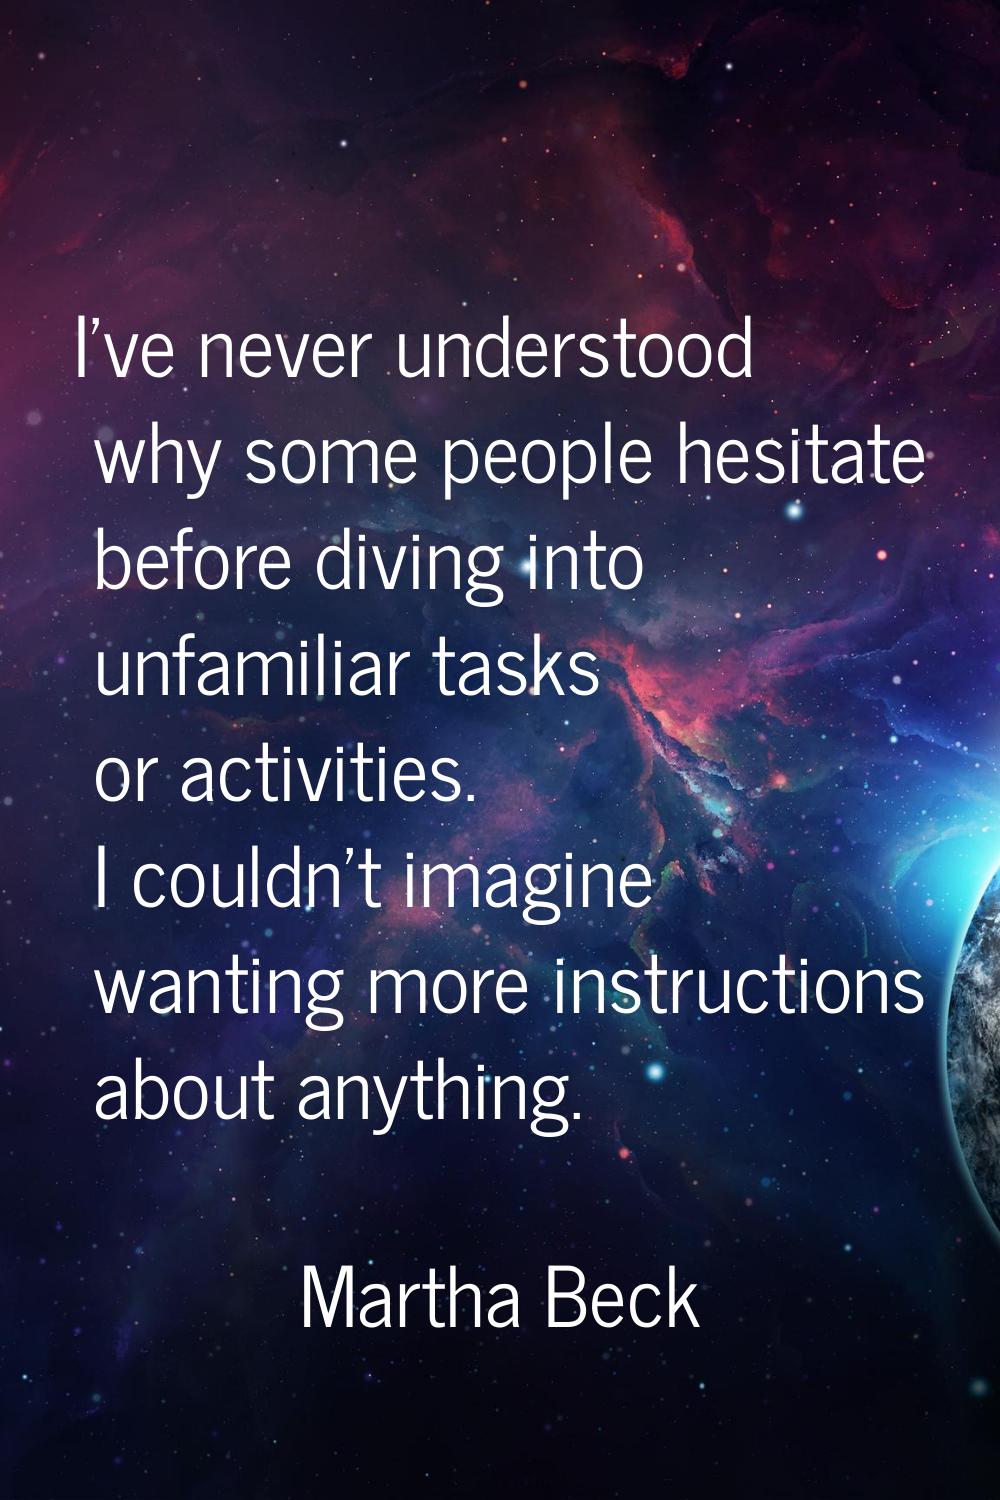 I've never understood why some people hesitate before diving into unfamiliar tasks or activities. I